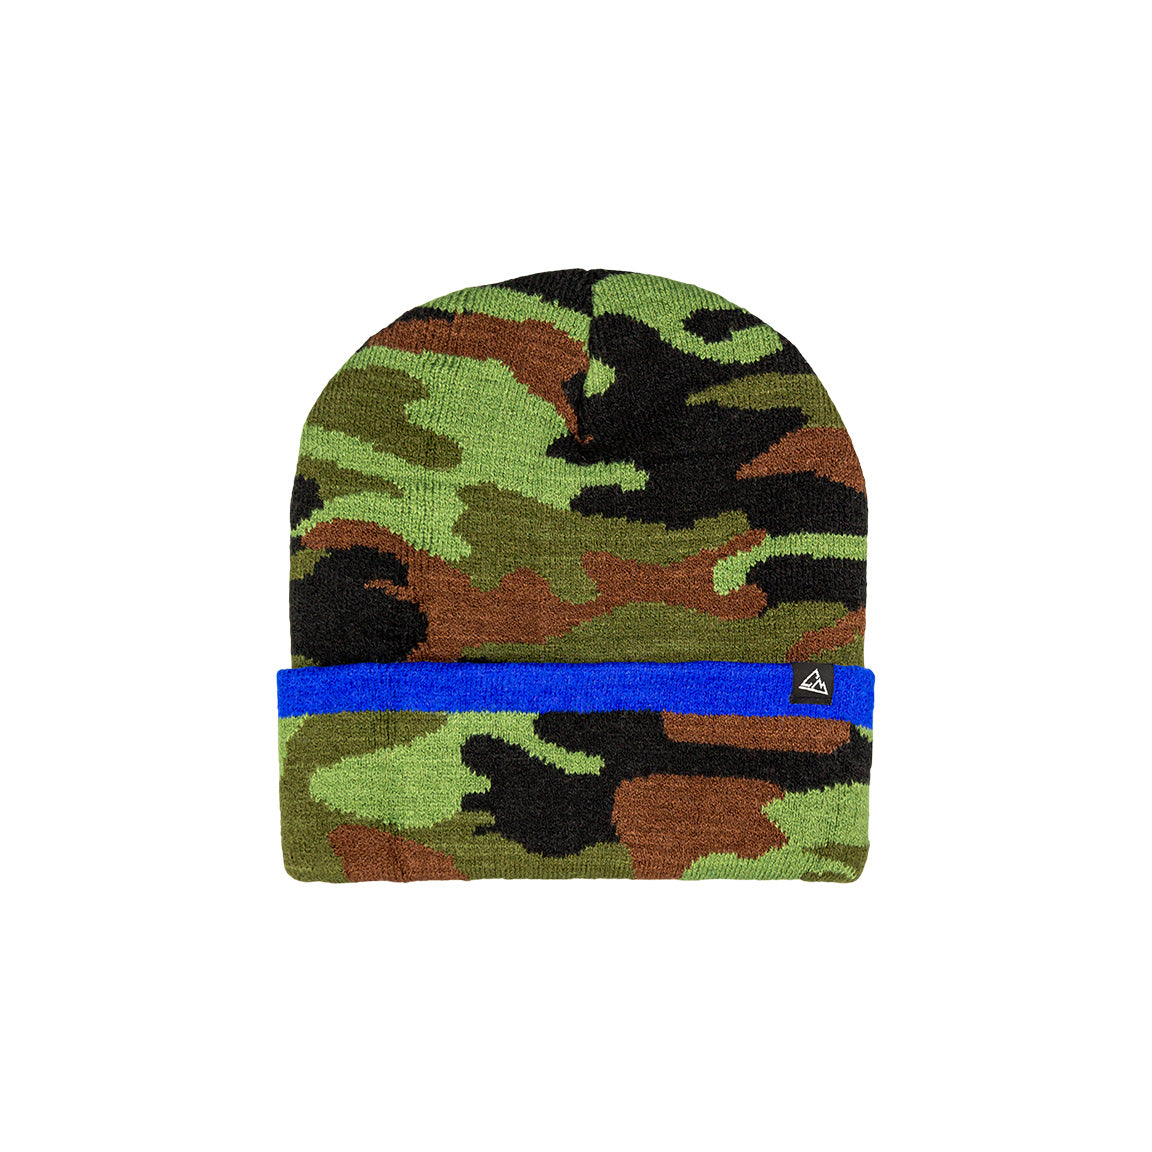 This beanie has a camo design with green, brown, and black, accented with a bright blue cuff and a small triangular emblem.